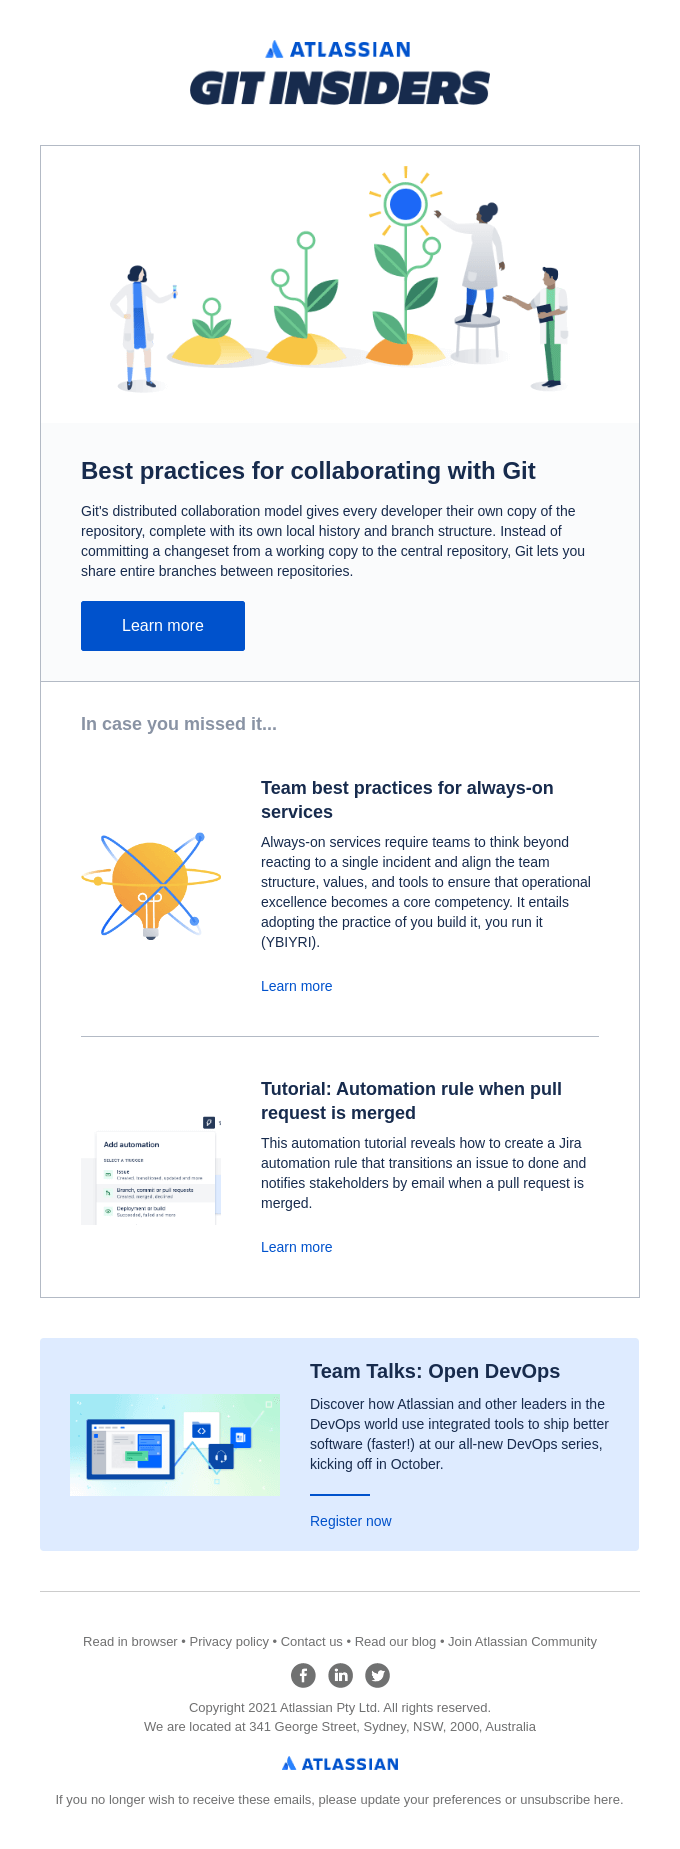 How to sync and collaborate with Git - Atlassian Email Newsletter